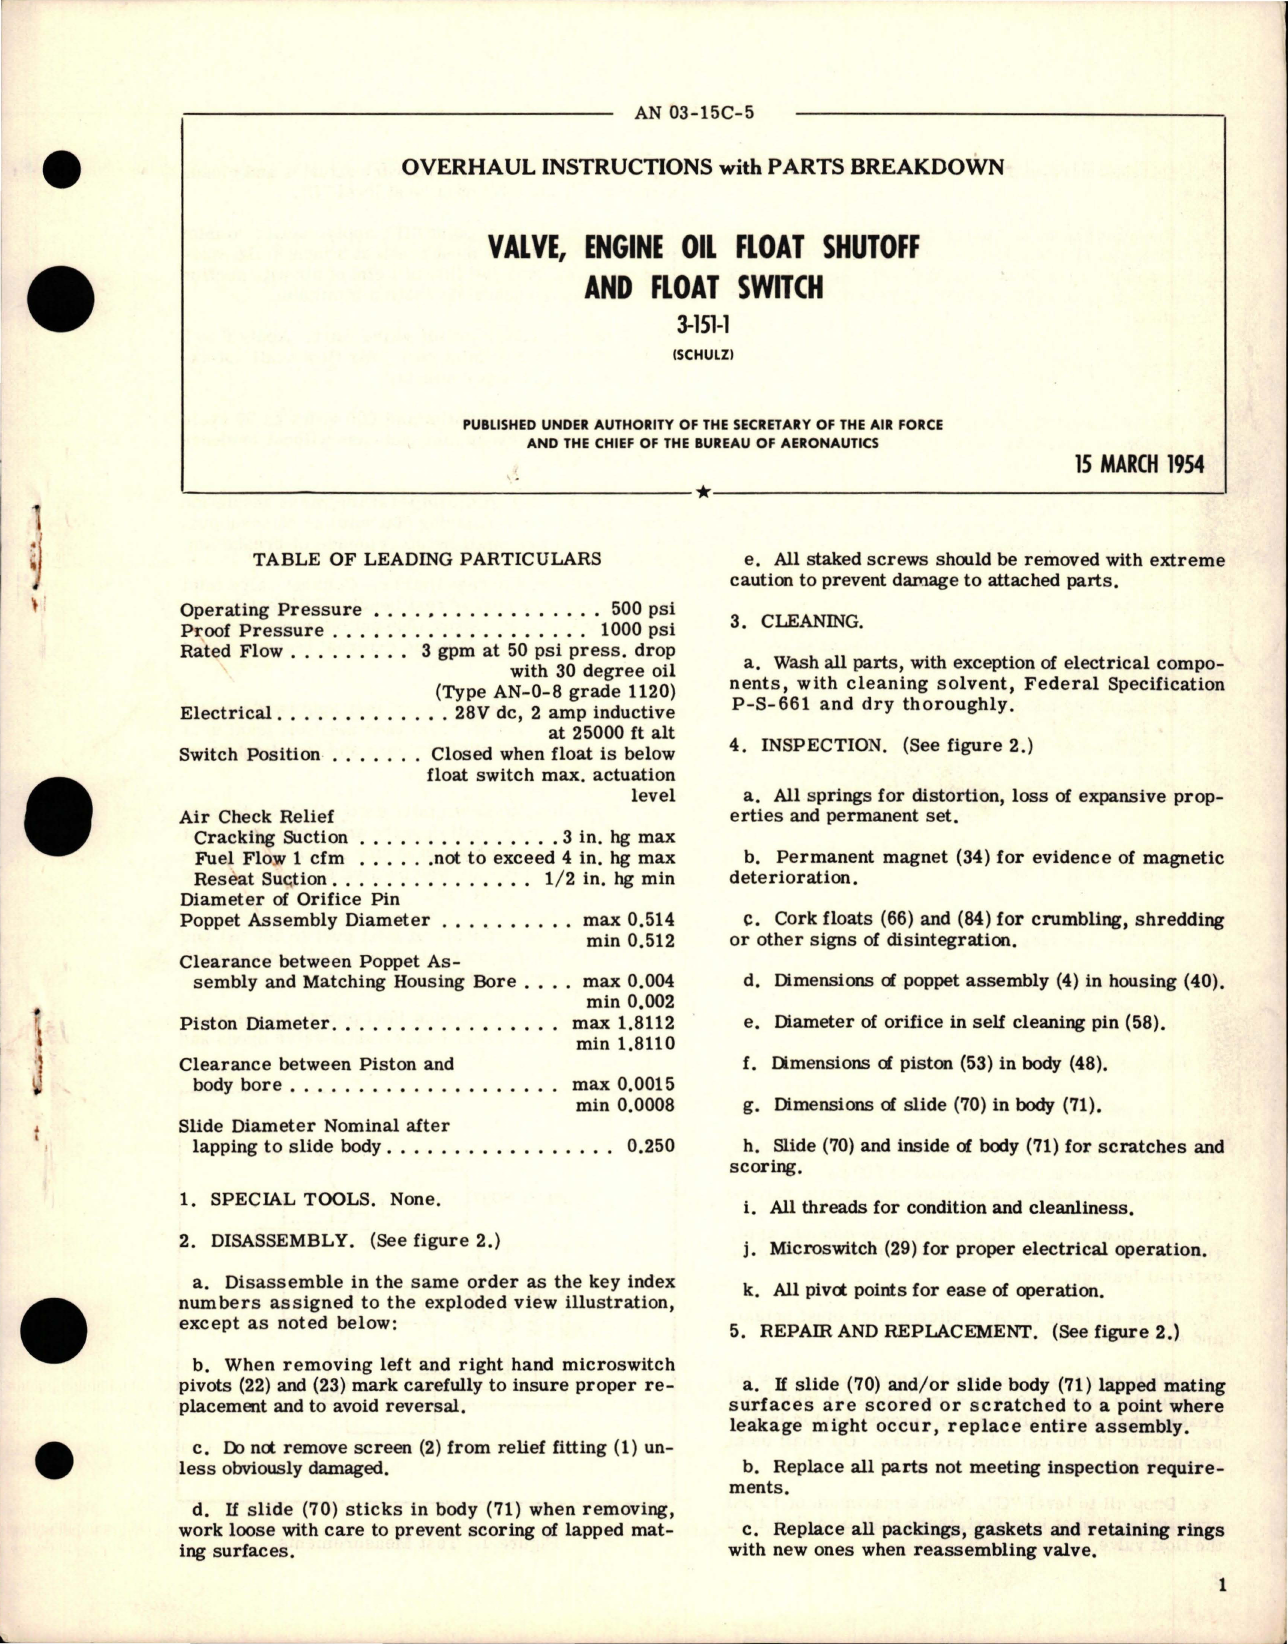 Sample page 1 from AirCorps Library document: Overhaul Instructions with Parts Breakdown for Engine Oil Float Shutoff and Float Switch - 3-151-1